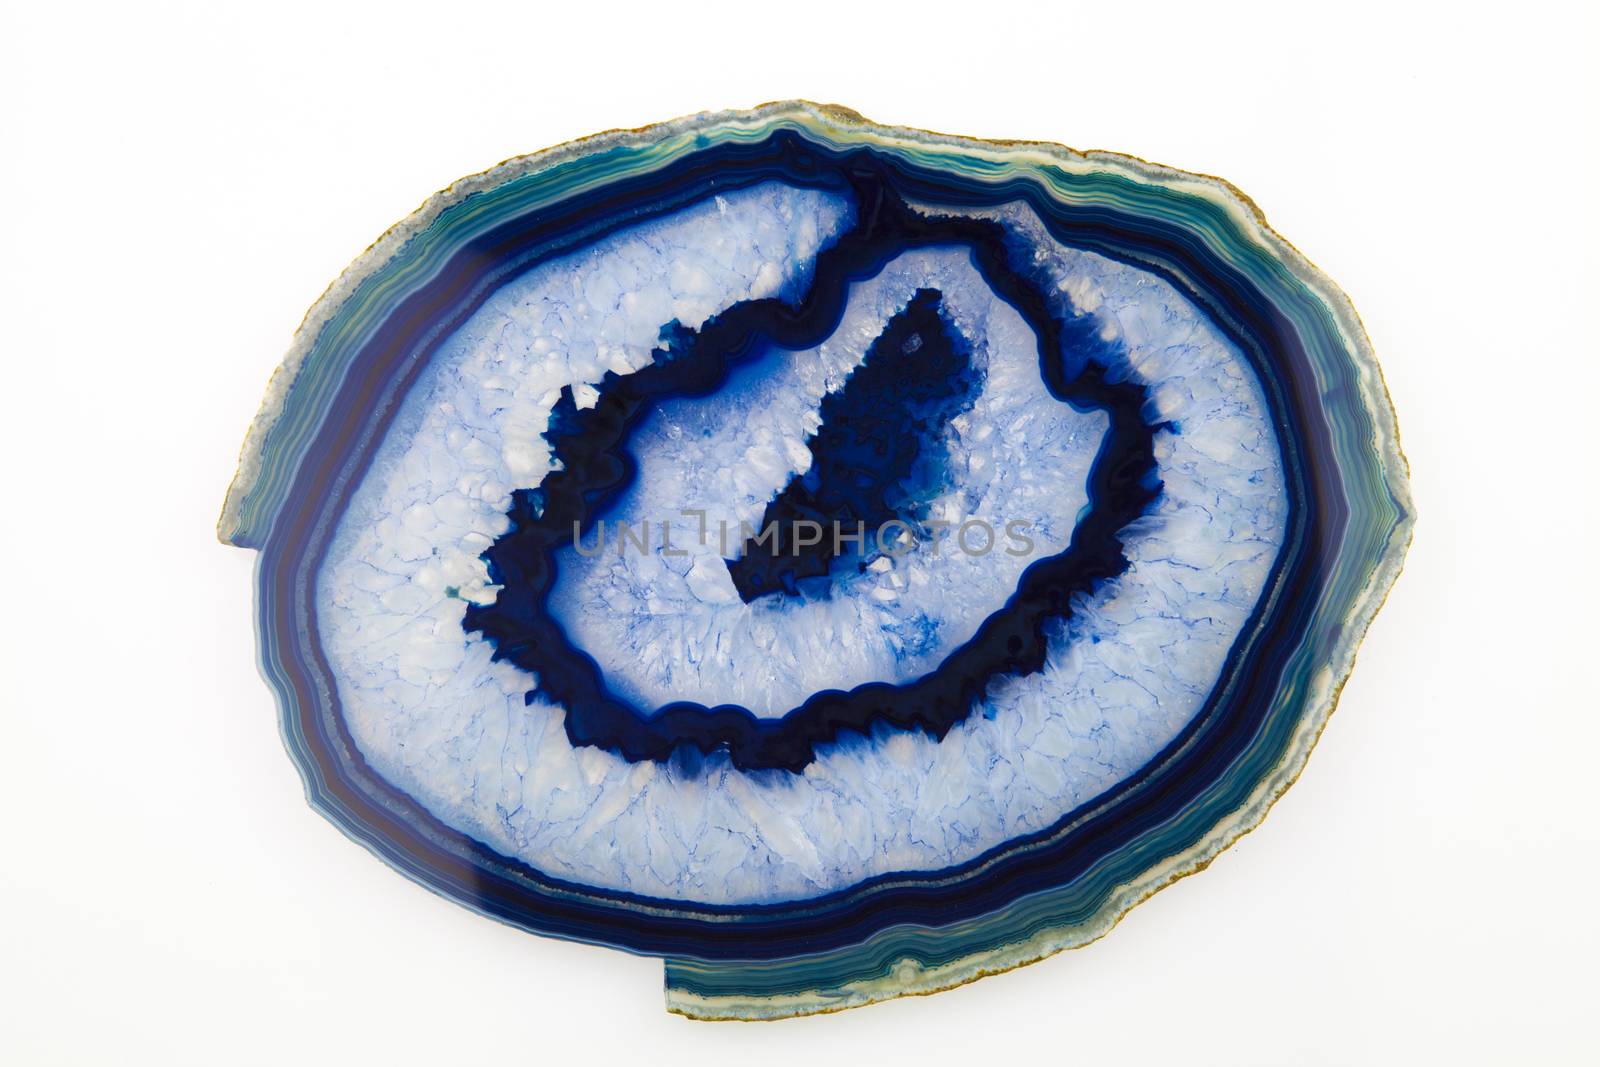 A slice of blue agate crystal on white background